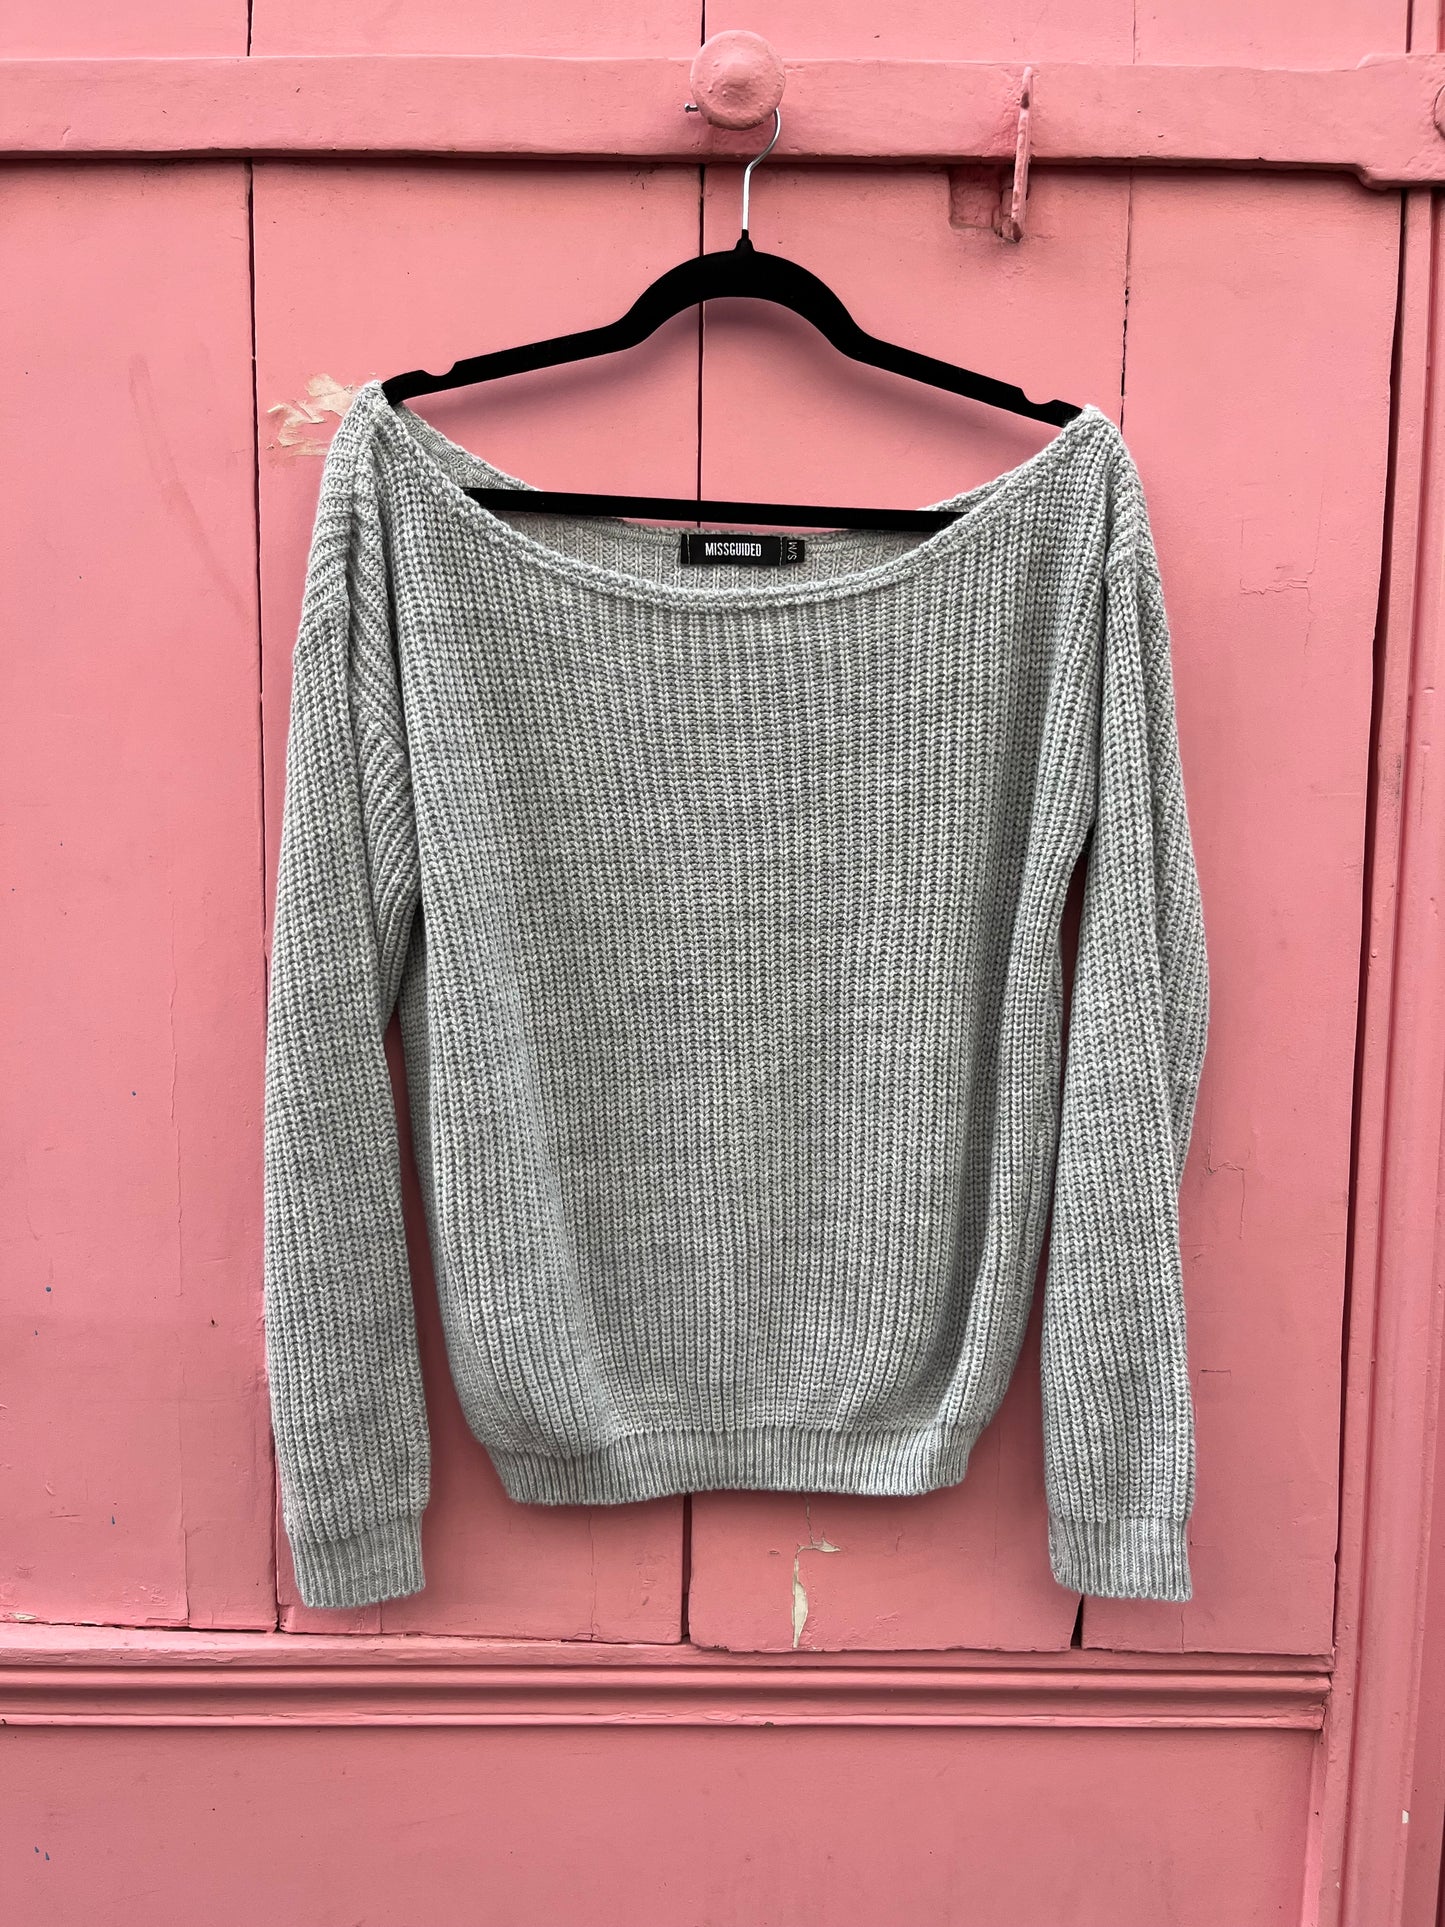 Le pull, MISSGUIDED, taille 34-36